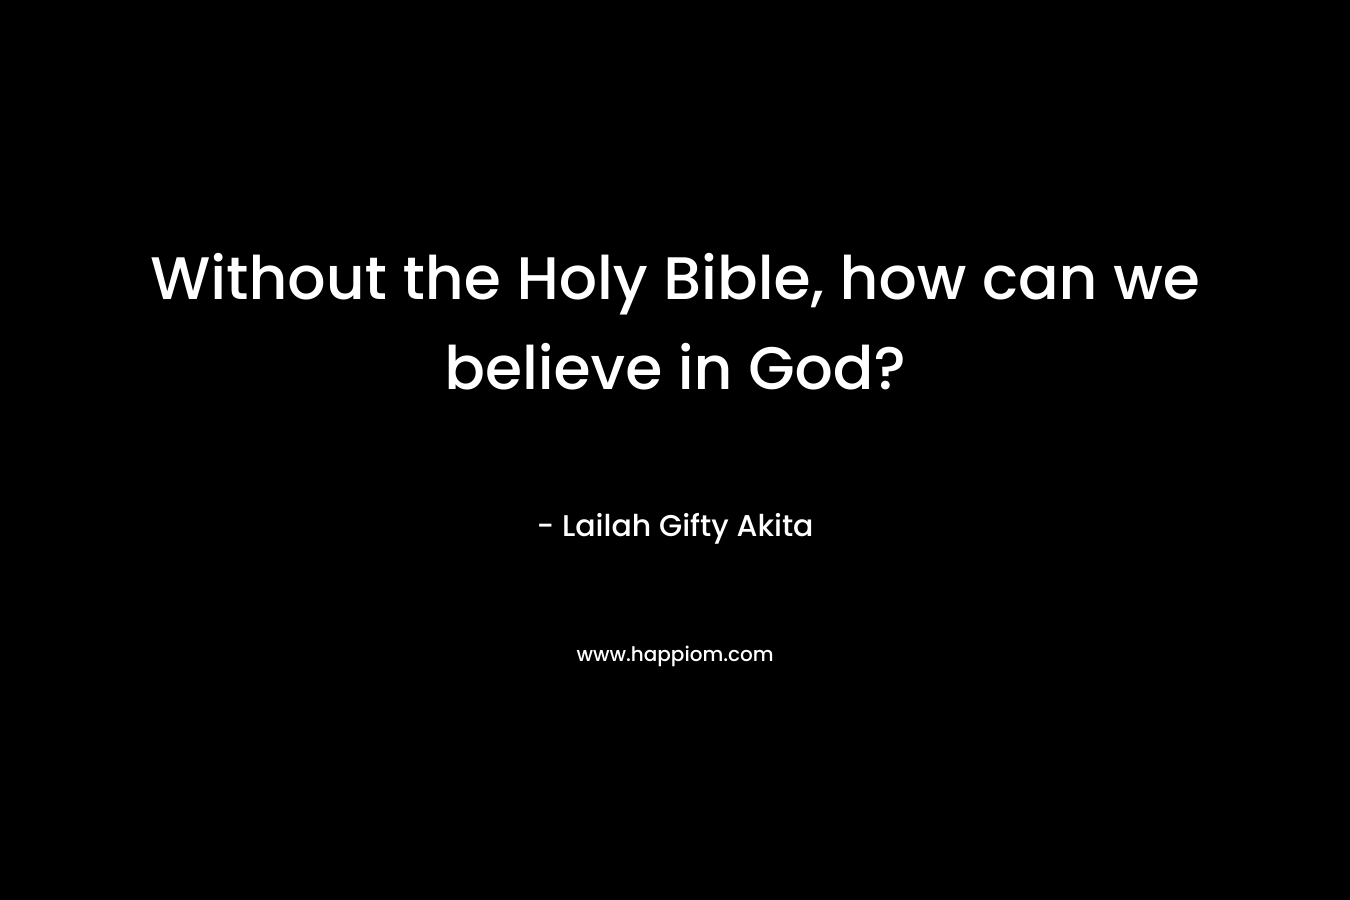 Without the Holy Bible, how can we believe in God?